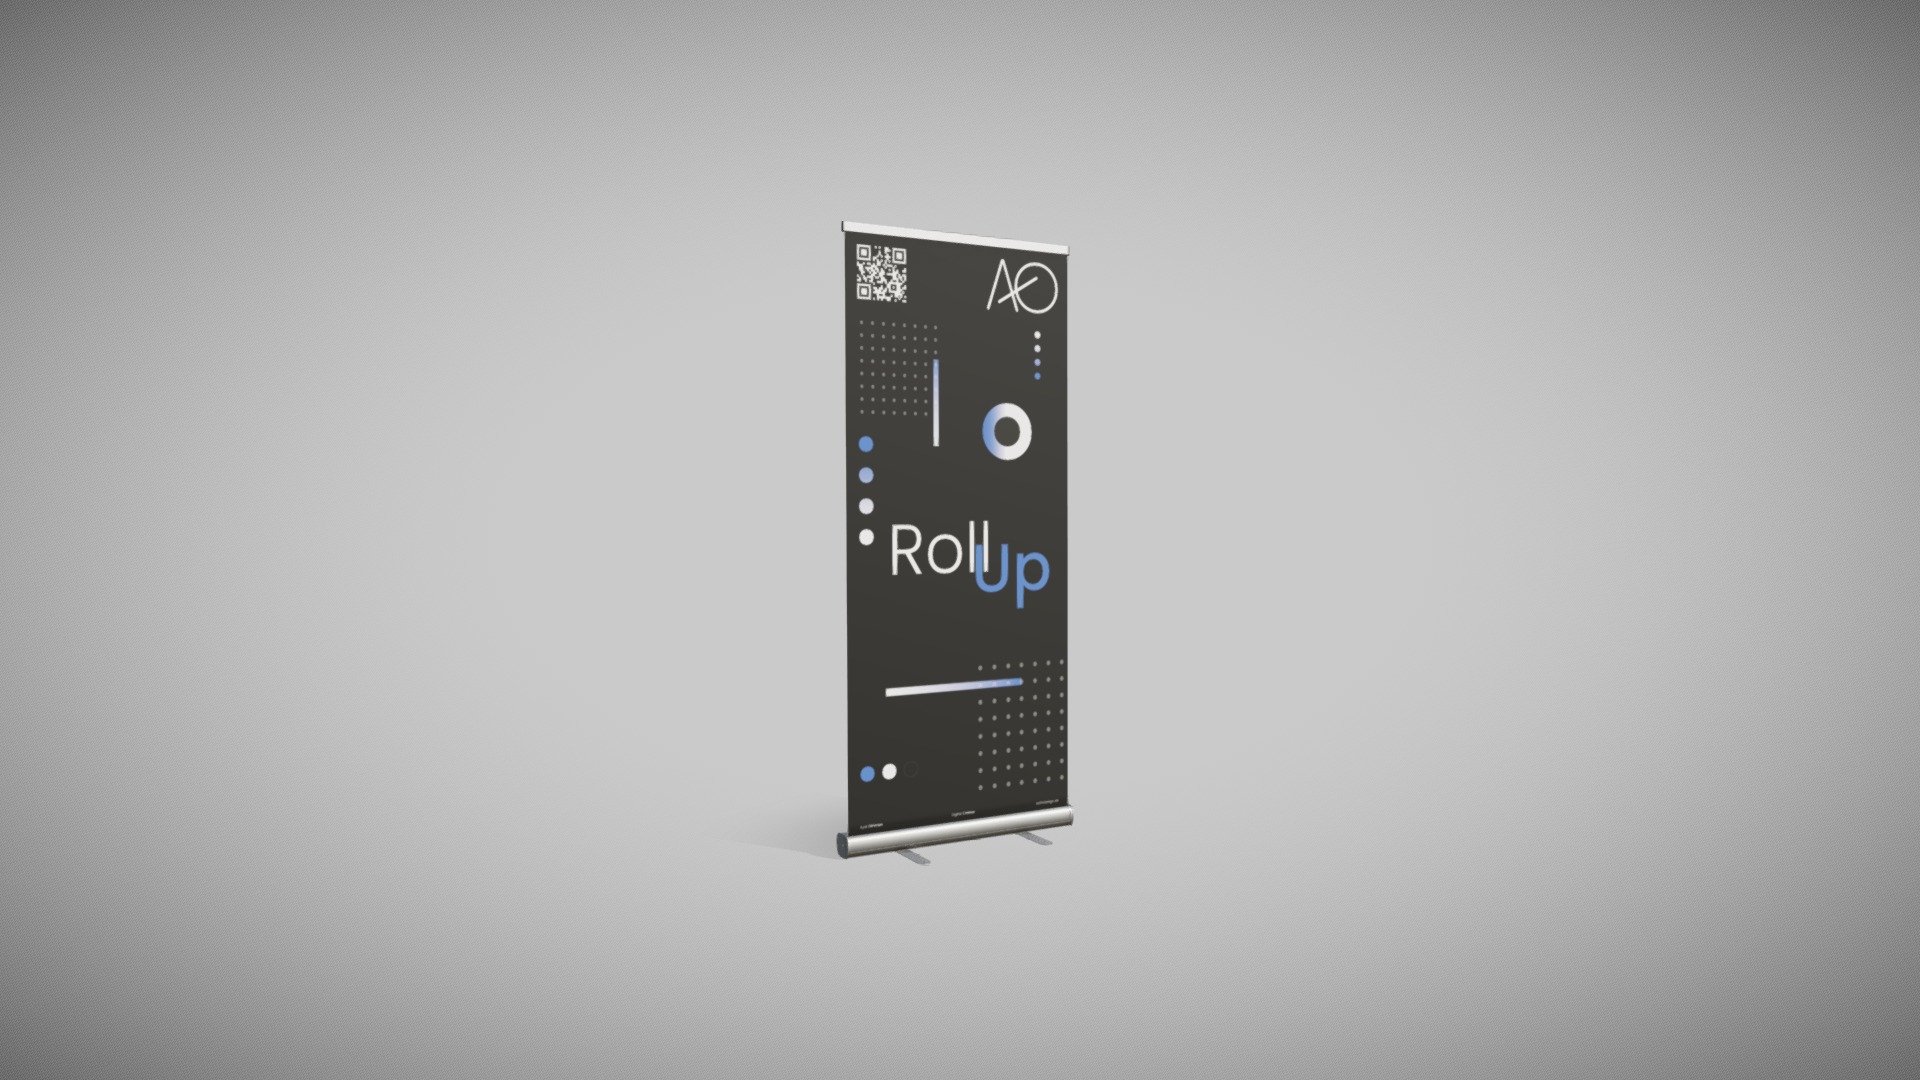 a Rollup is a type of banner display that can be used to promote your business, product, or service at various events. A rollup is usually made of a printed material that can be rolled up or folded for easy transport and display. It can be set up in seconds by pulling the material out of a stand and attaching it to a pole.
It can be used to attract attention, convey your message, and create a professional image - RollUp for Exhibition - 3D model by Ayal Othman (@aofordesign) 3d model